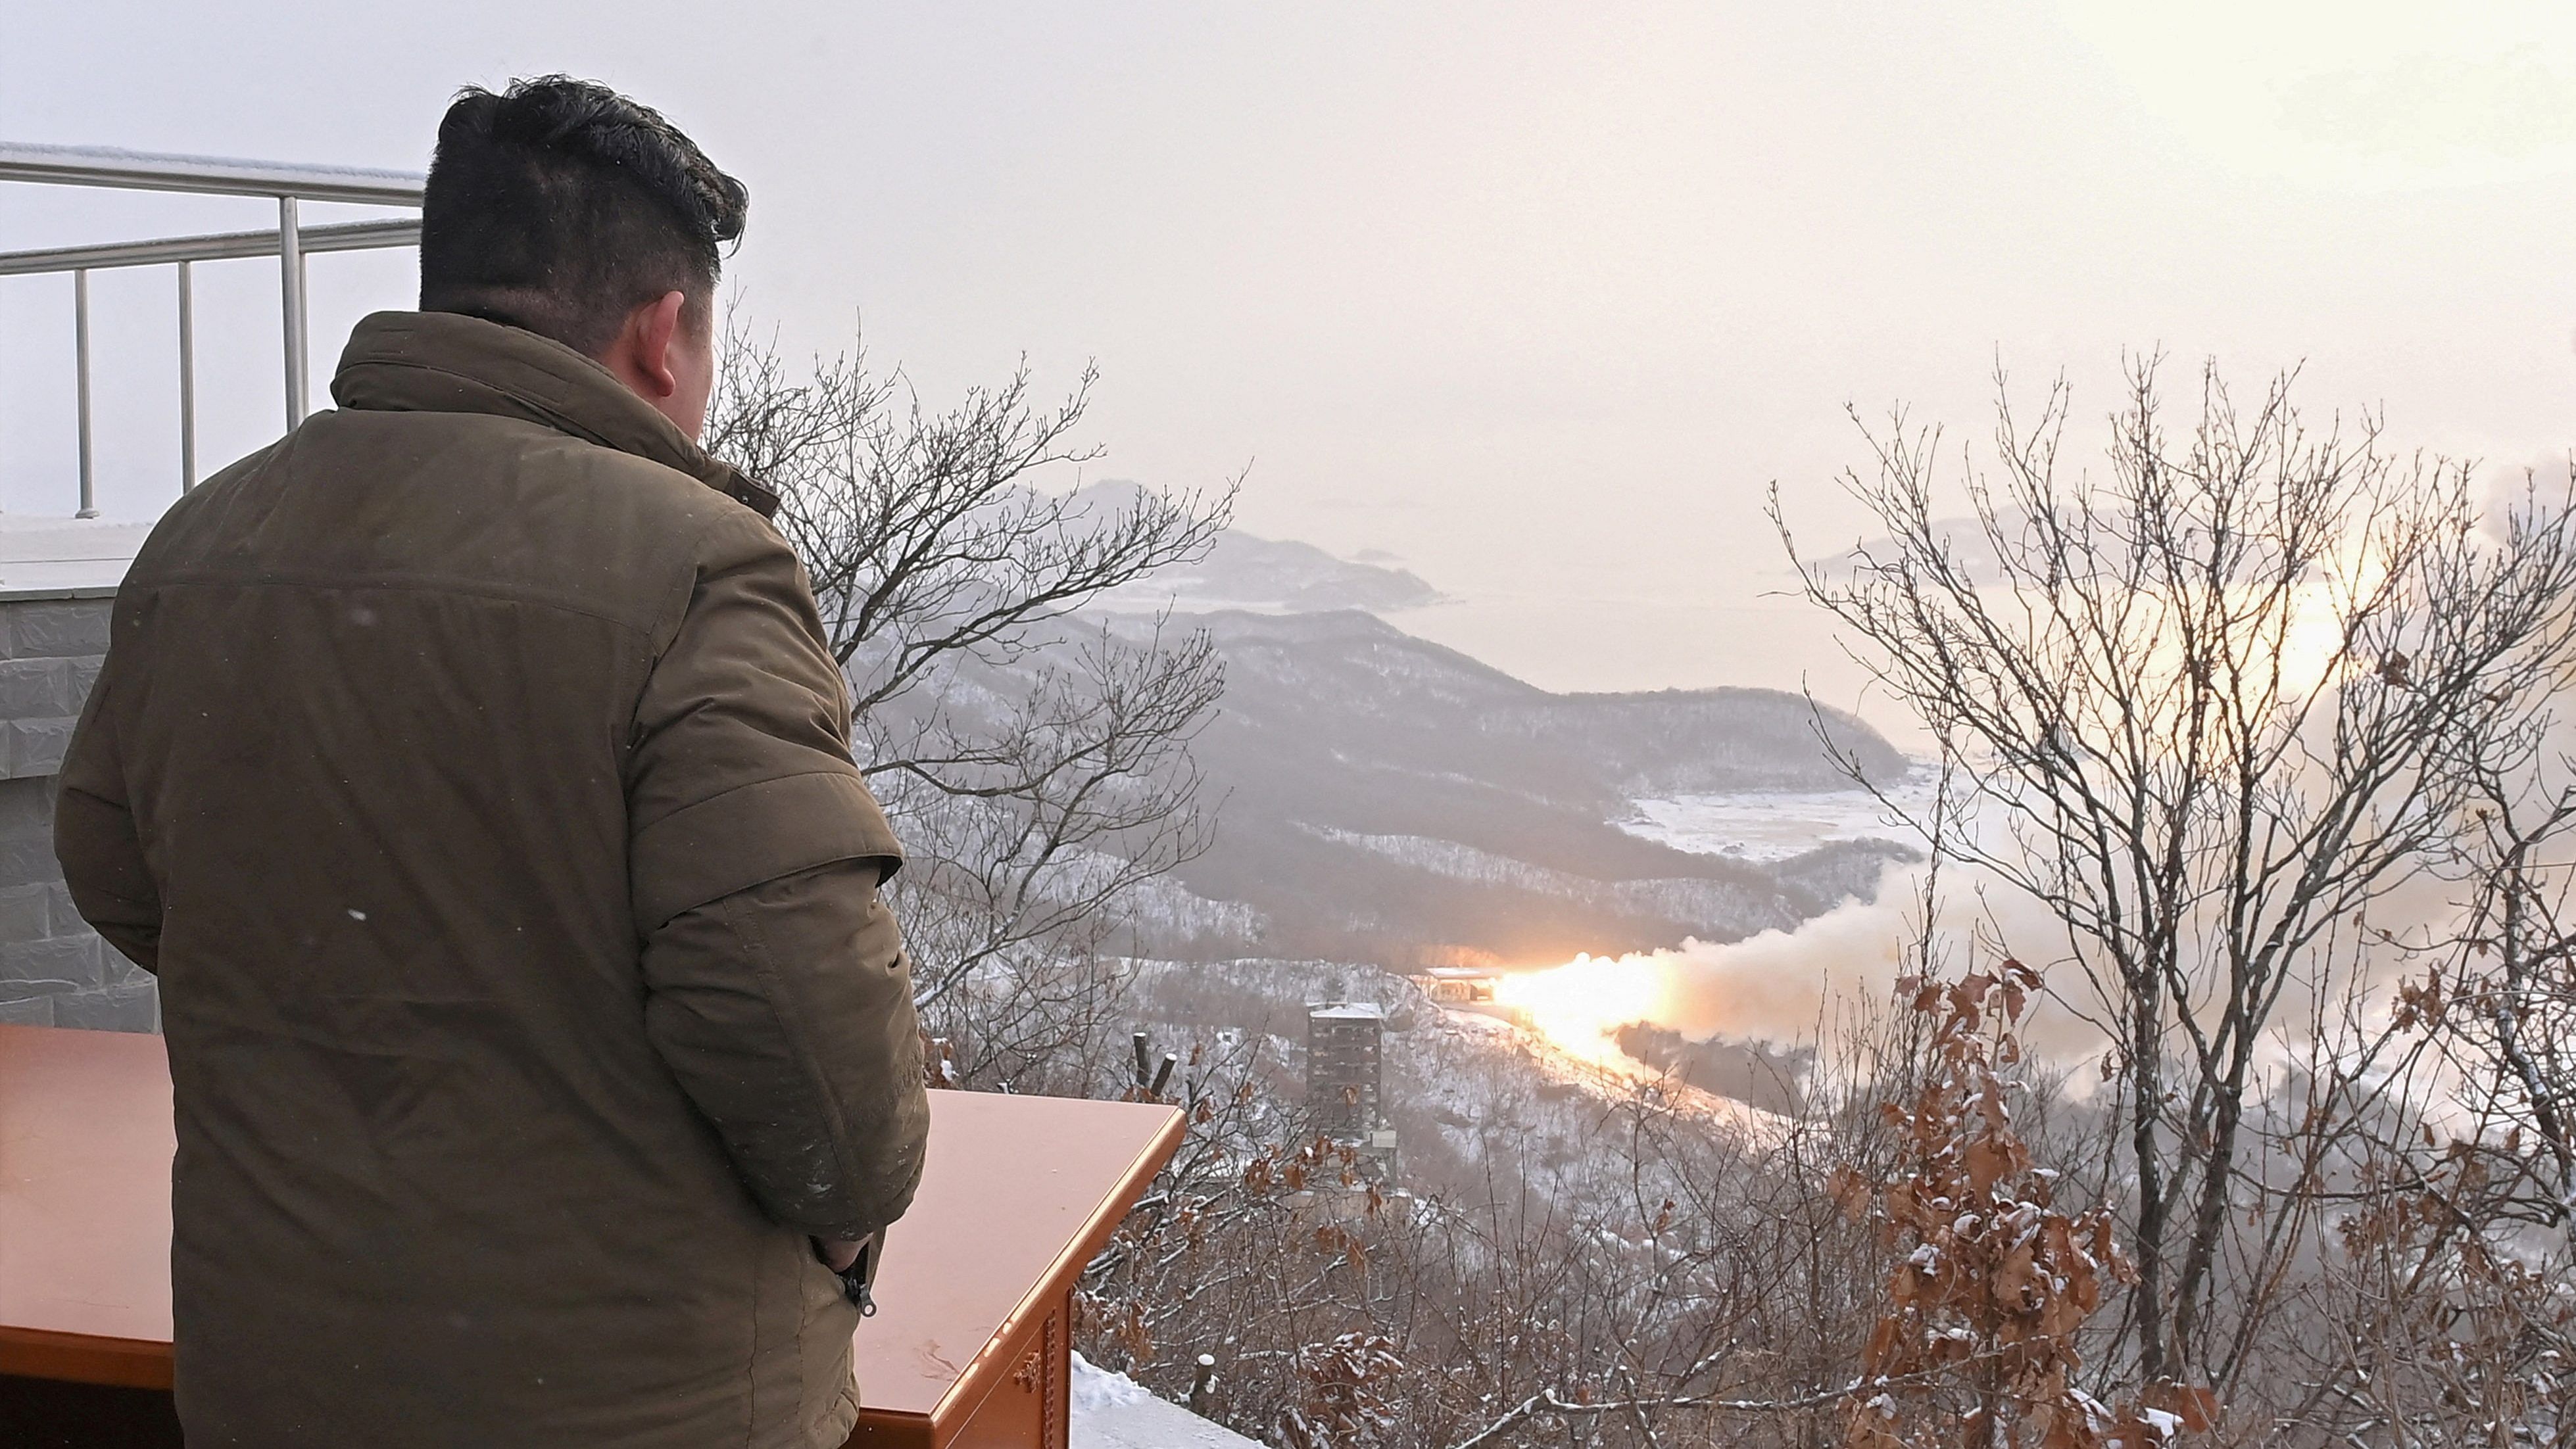 North Korean leader leader Kim Jong Un guides a "high-thrust solid-fuel motor" test as part of the development of a new strategic weapon. Credit: Reuters